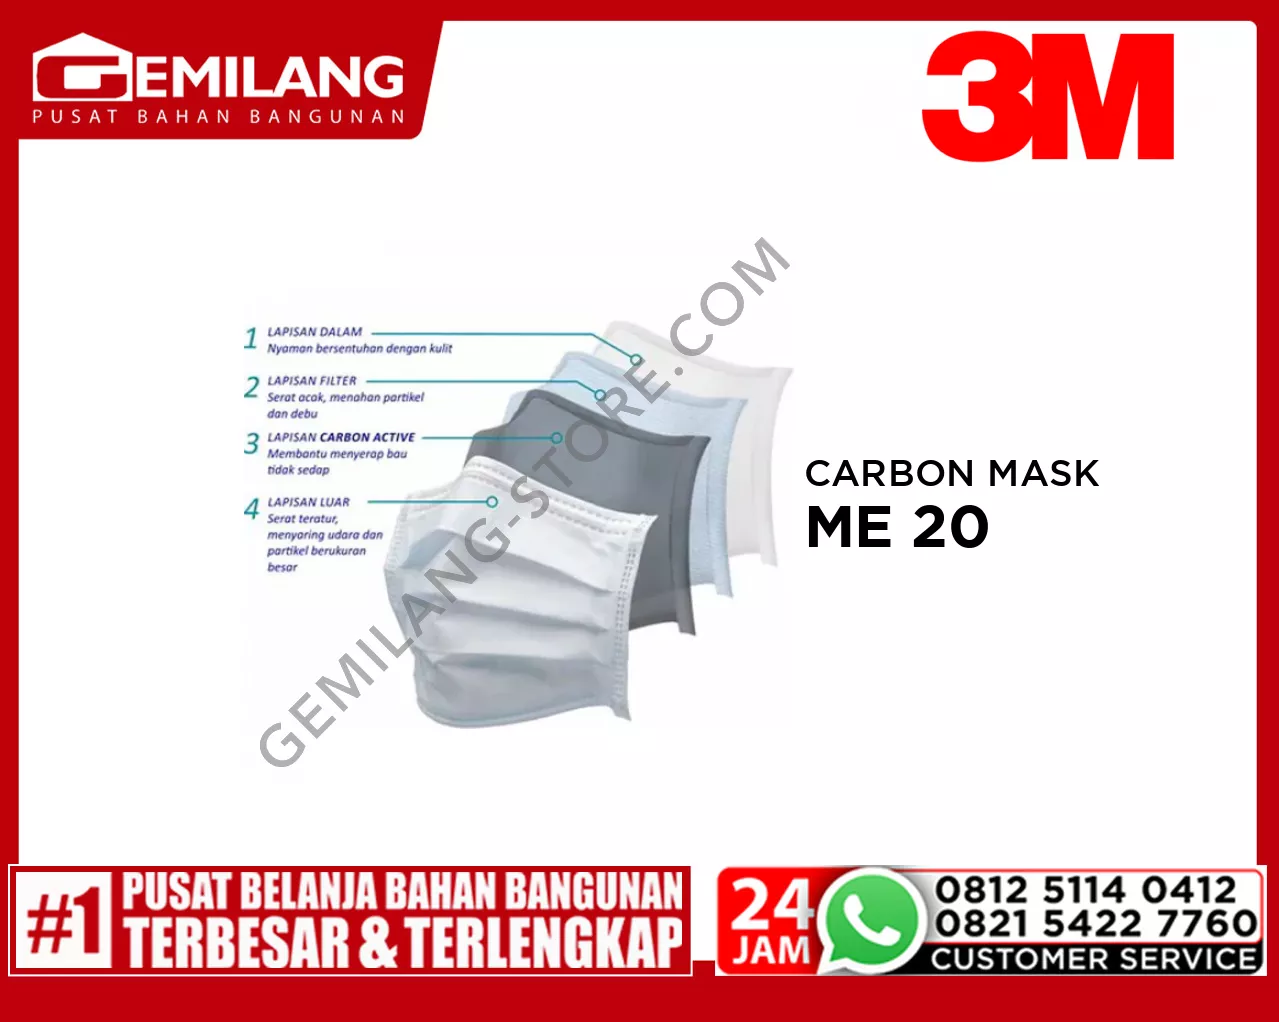 3M NEXCARE EXTRA CARBON MASK ME 20